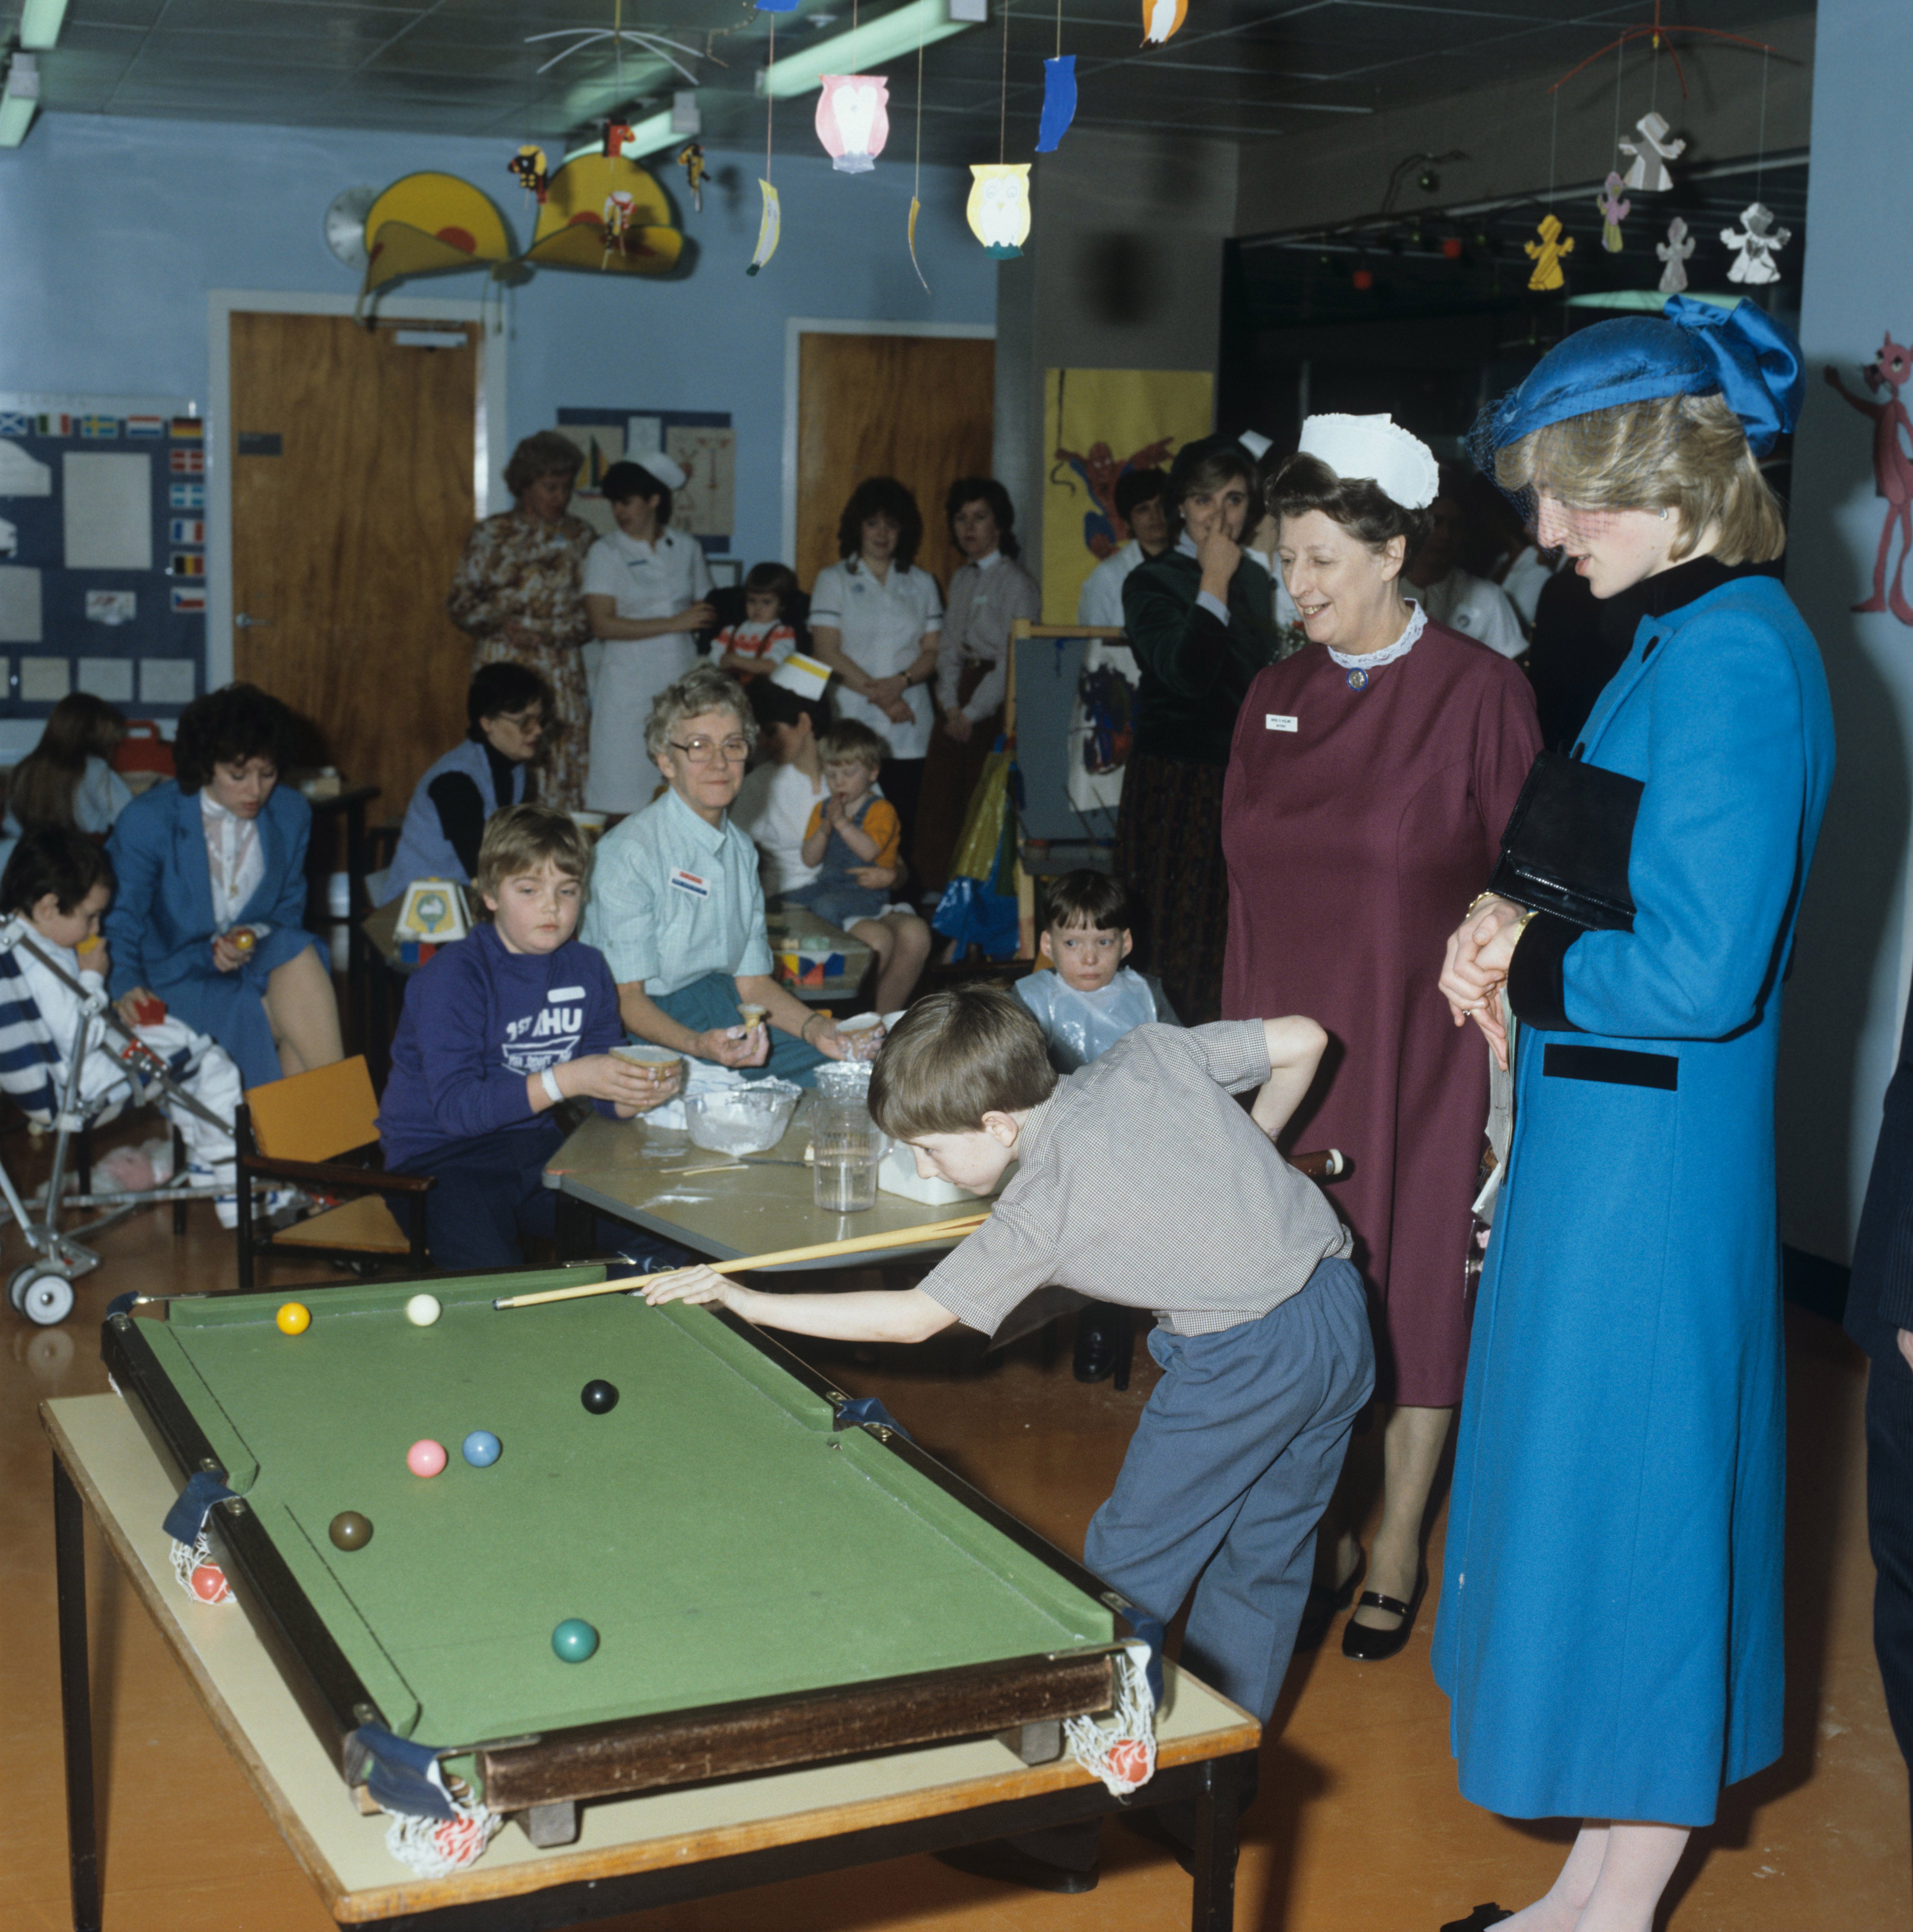 Diana visiting the Royal Hospital for Sick Children in Yorkhill, Glasgow, Scotland in 1983